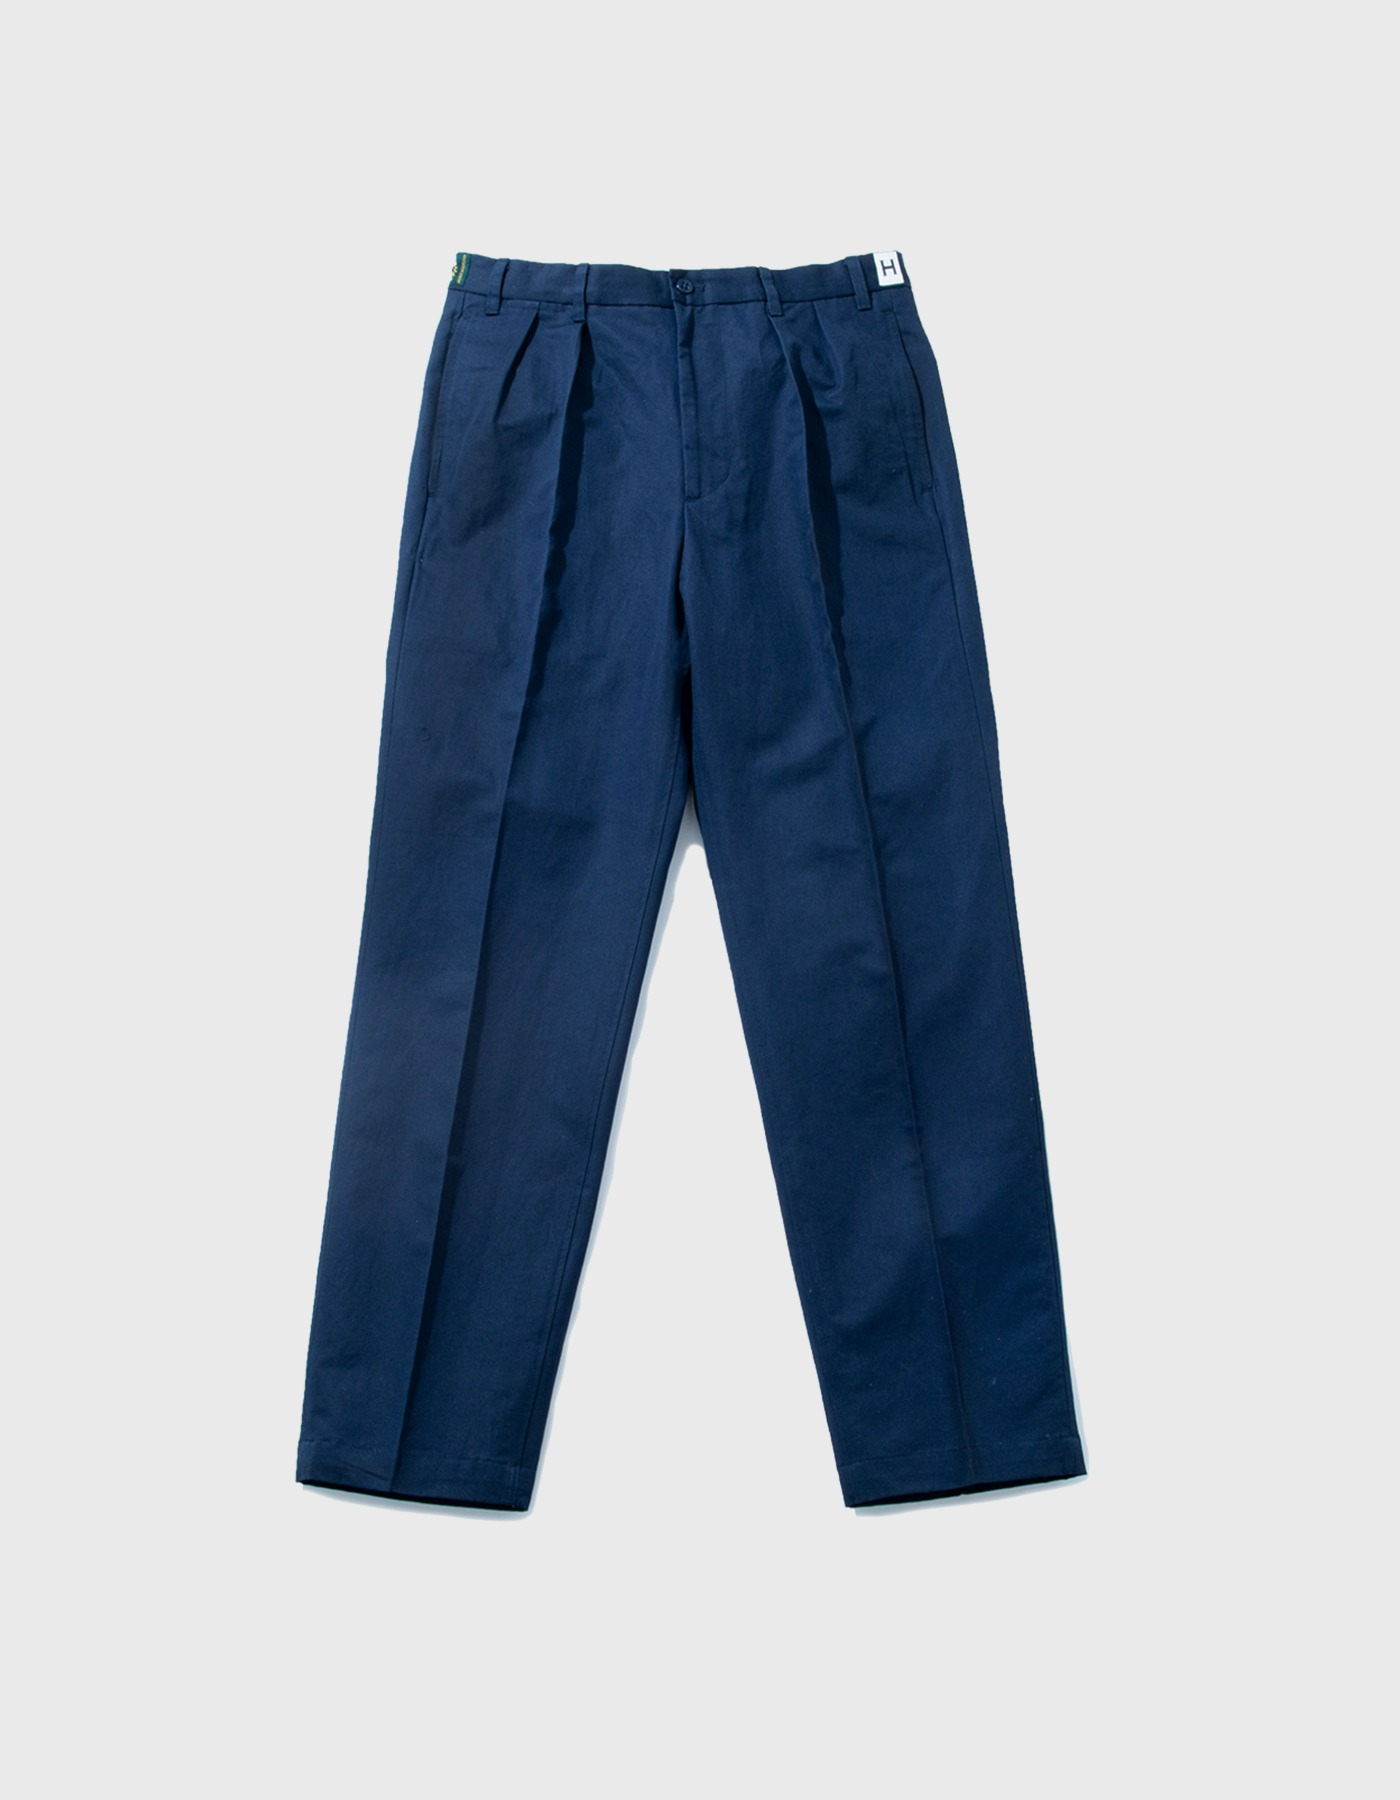 VINTAGE WASHER LINEN CHINO PANTS / Navy